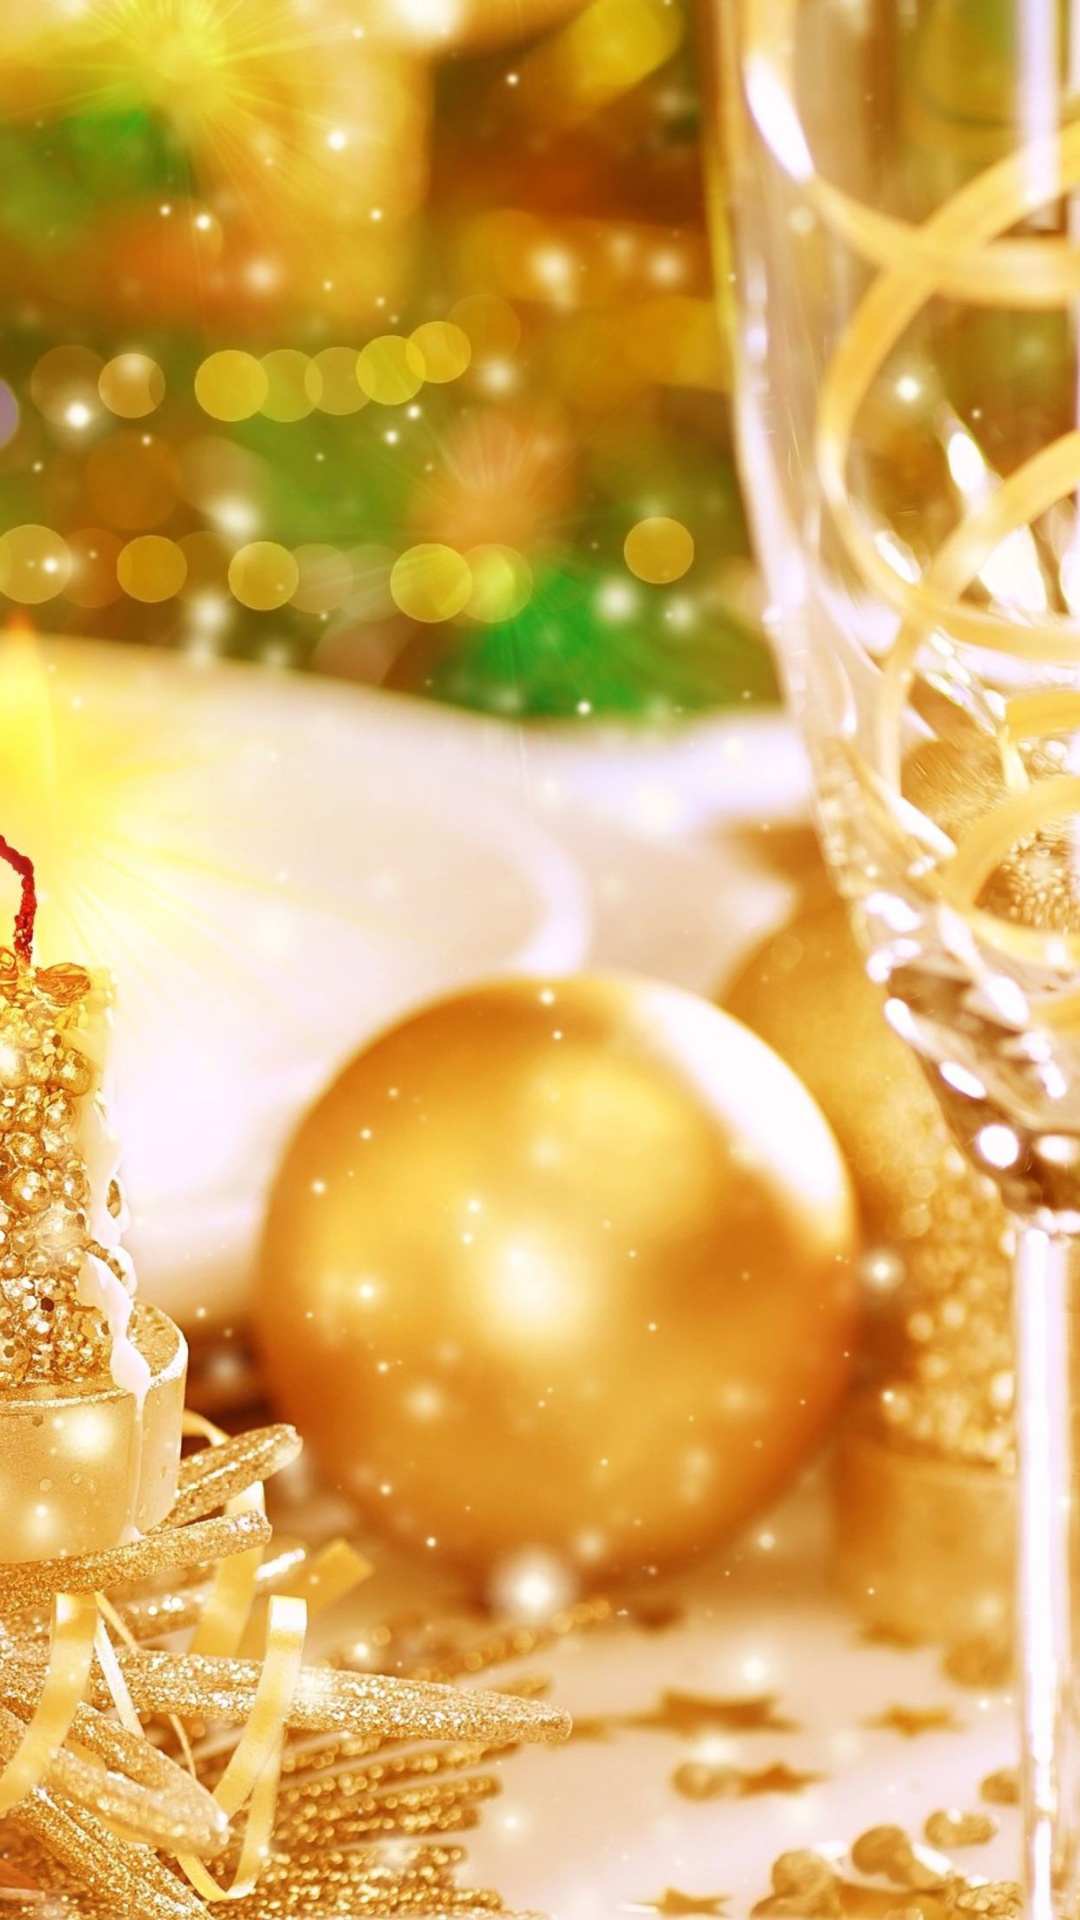 Gold Christmas Decorations wallpaper 1080x1920